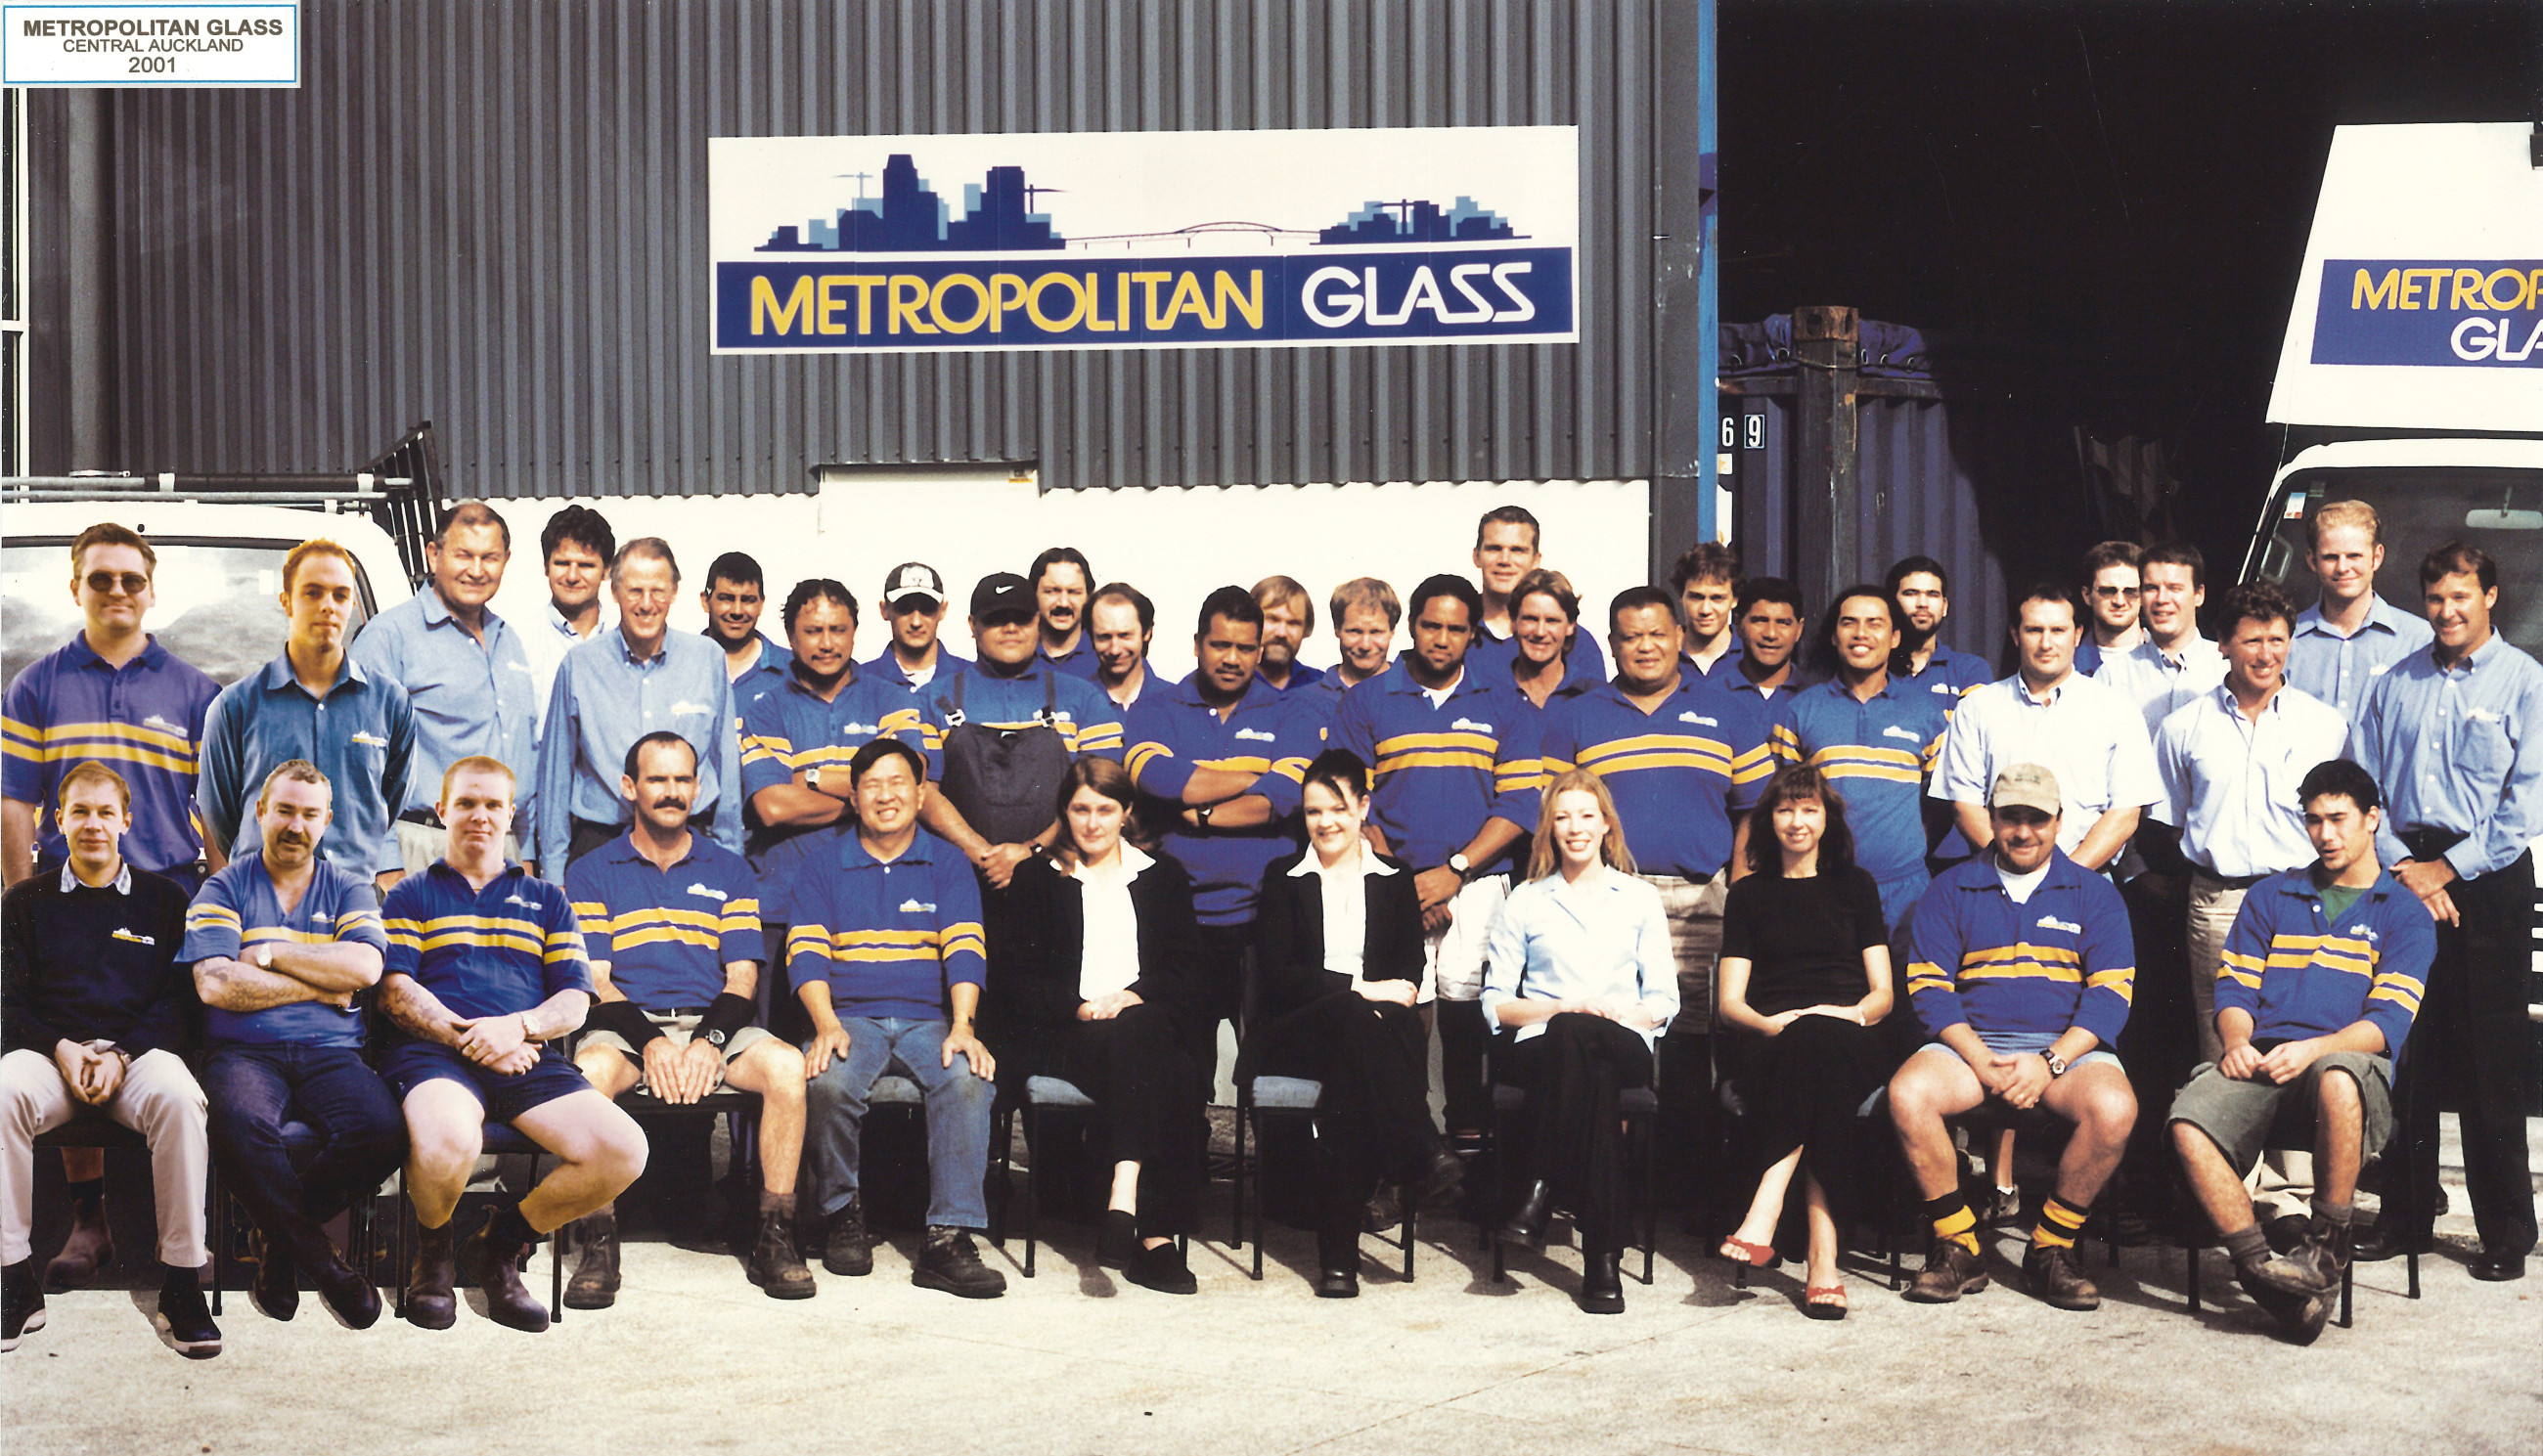 Vintage image of the metro glass team